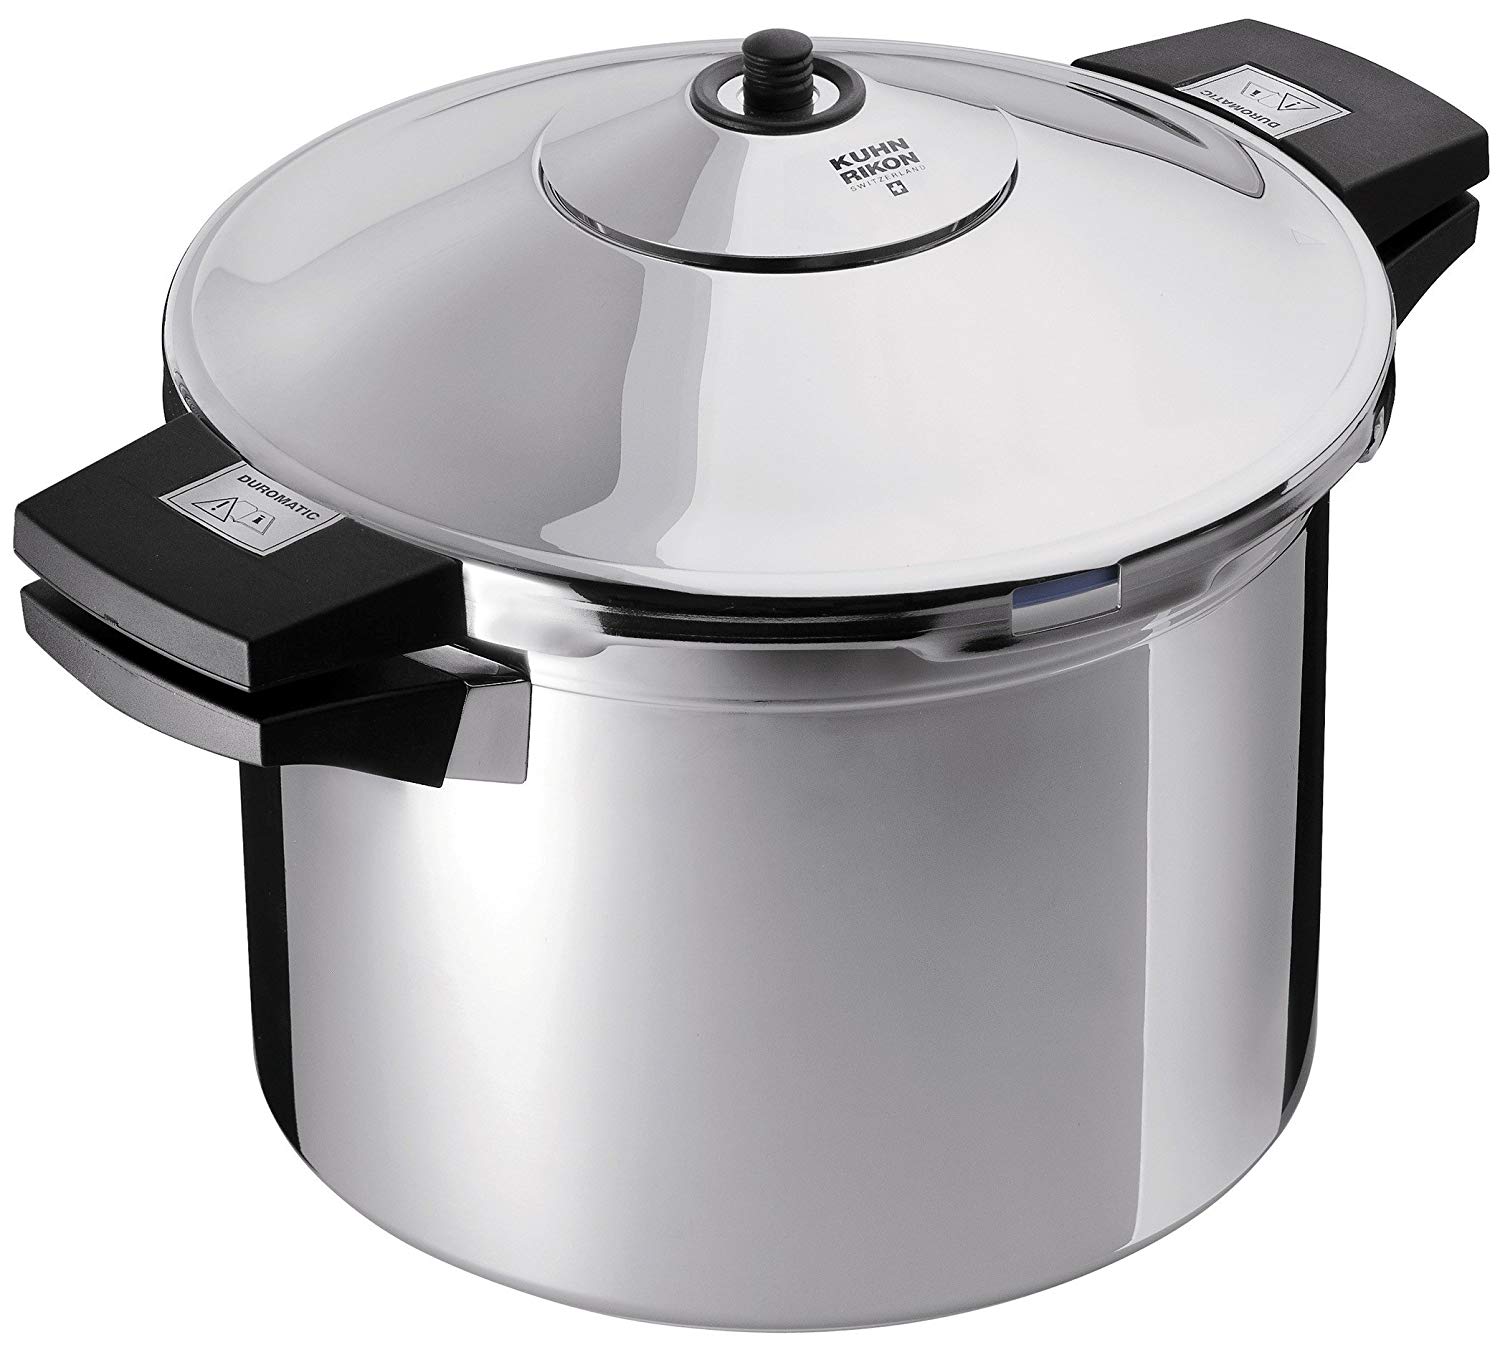 Kuhn Rikon Duromatic Inox Pressure Cooker With Side Grips (22cm), 8.0 Litre